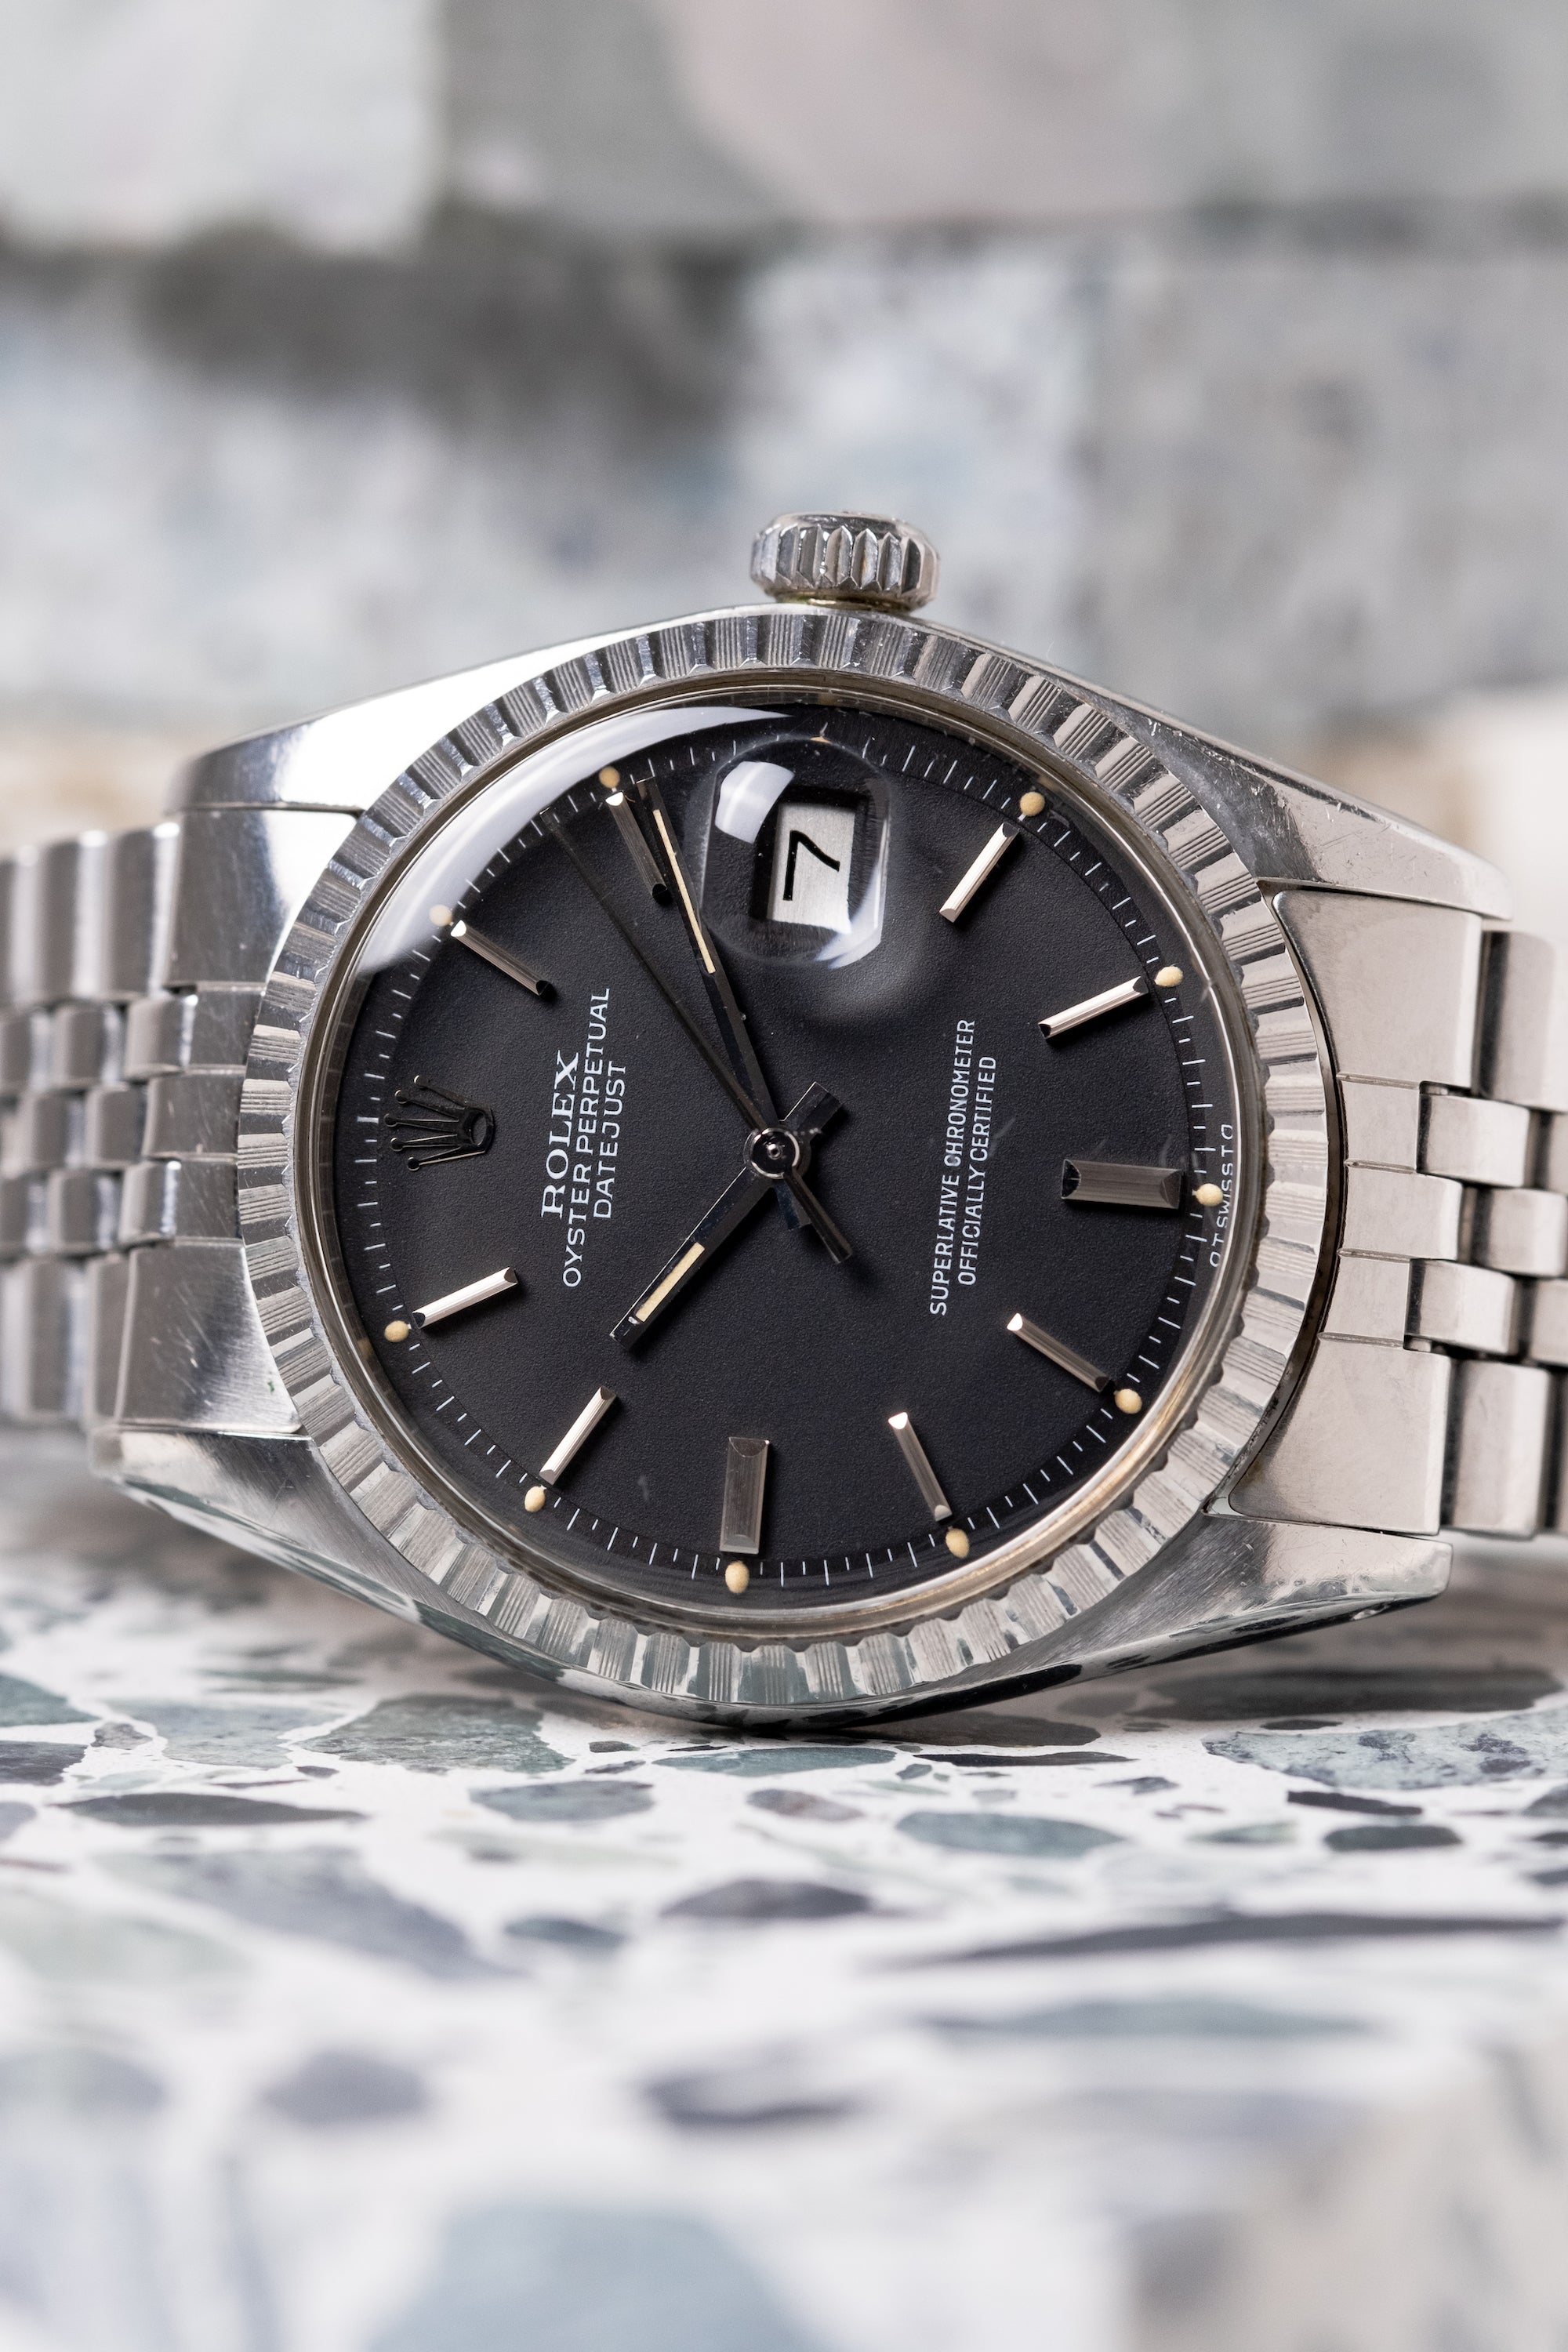 ROLEX Oyster Perpetual Datejust Ref. 1603 Black Sigma Dial (1975)